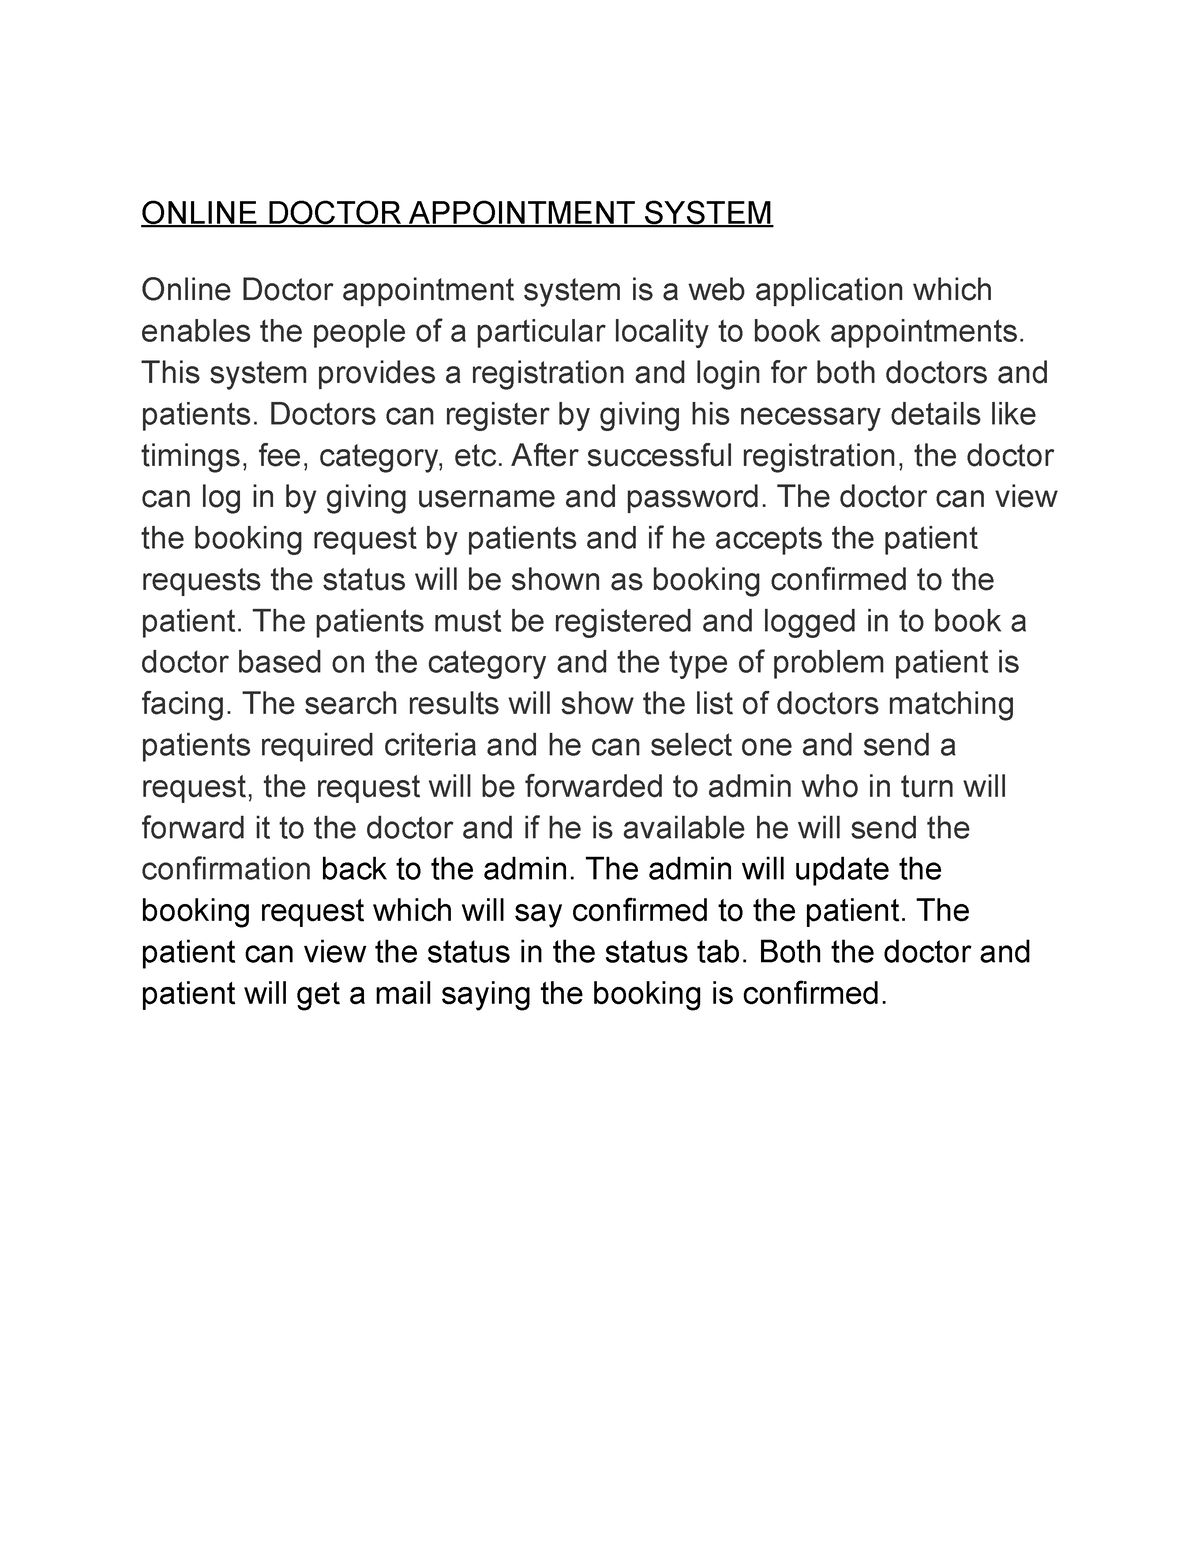 online-doctor-appointment-system-online-doctor-appointment-system